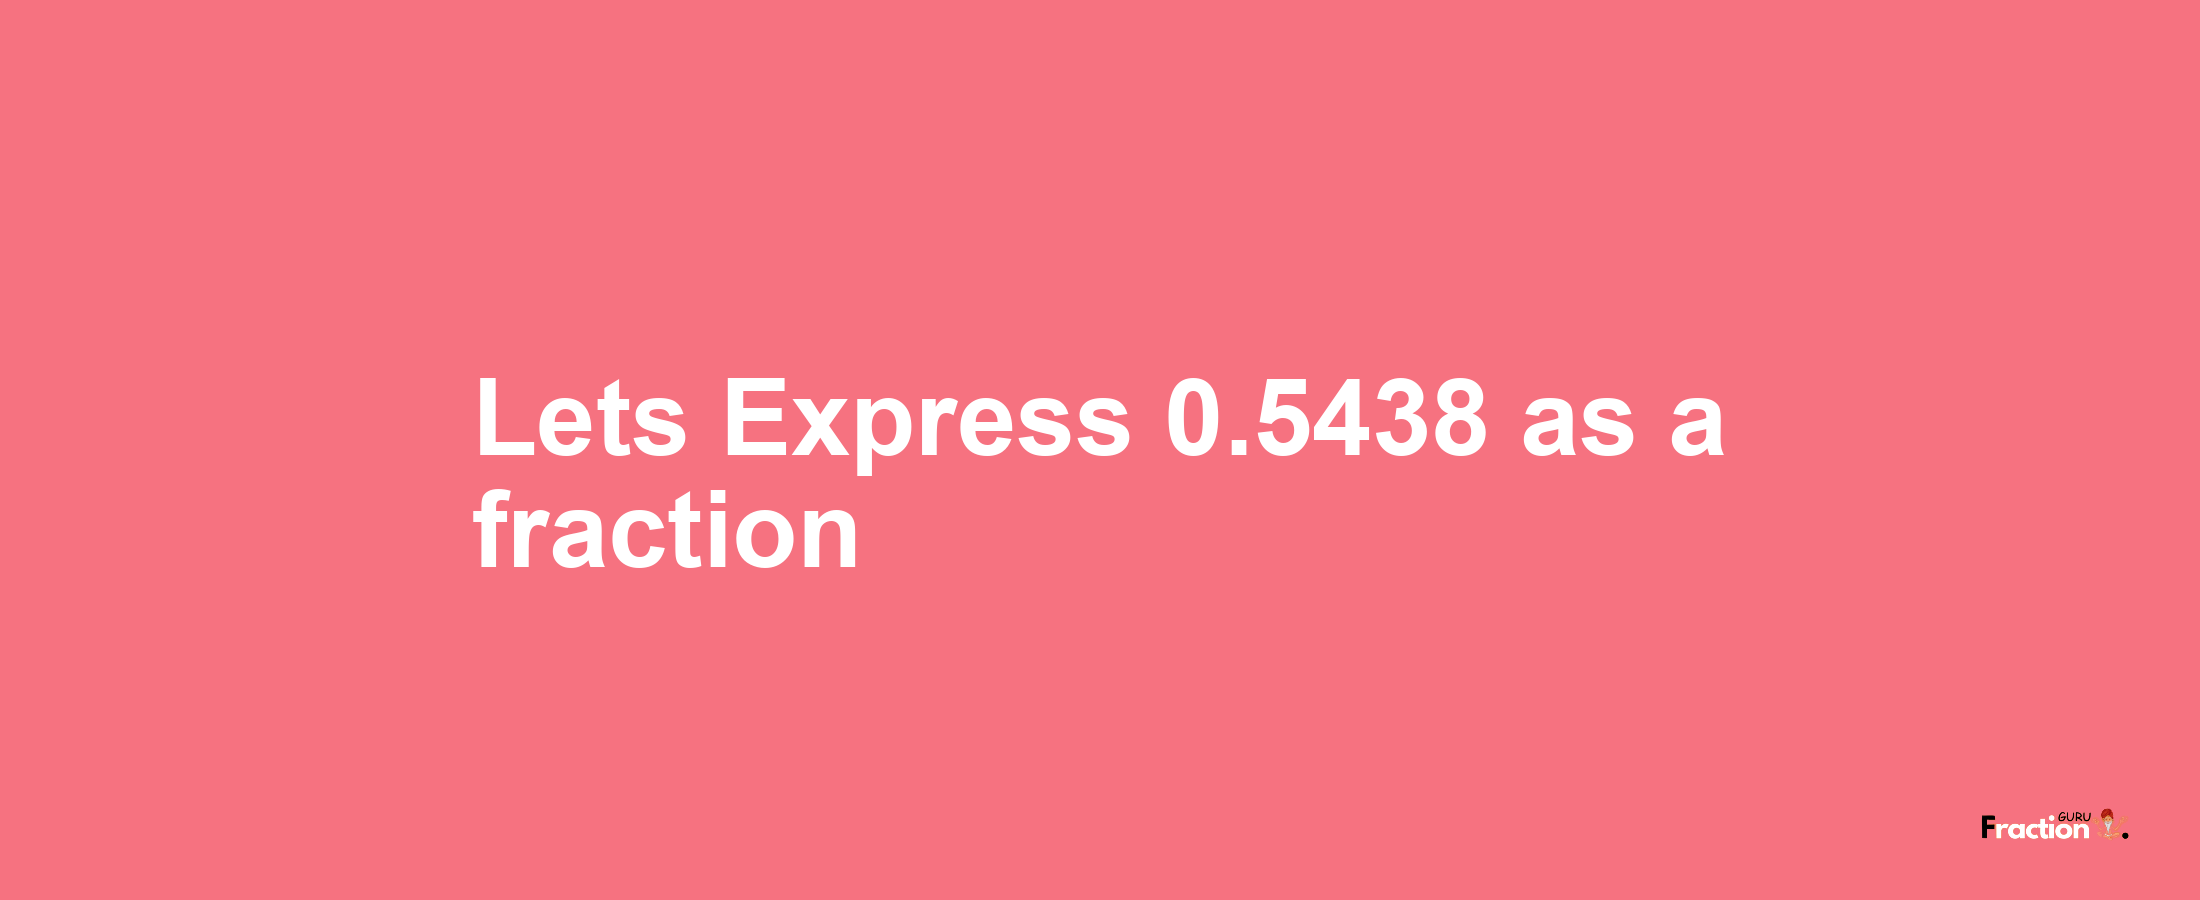 Lets Express 0.5438 as afraction